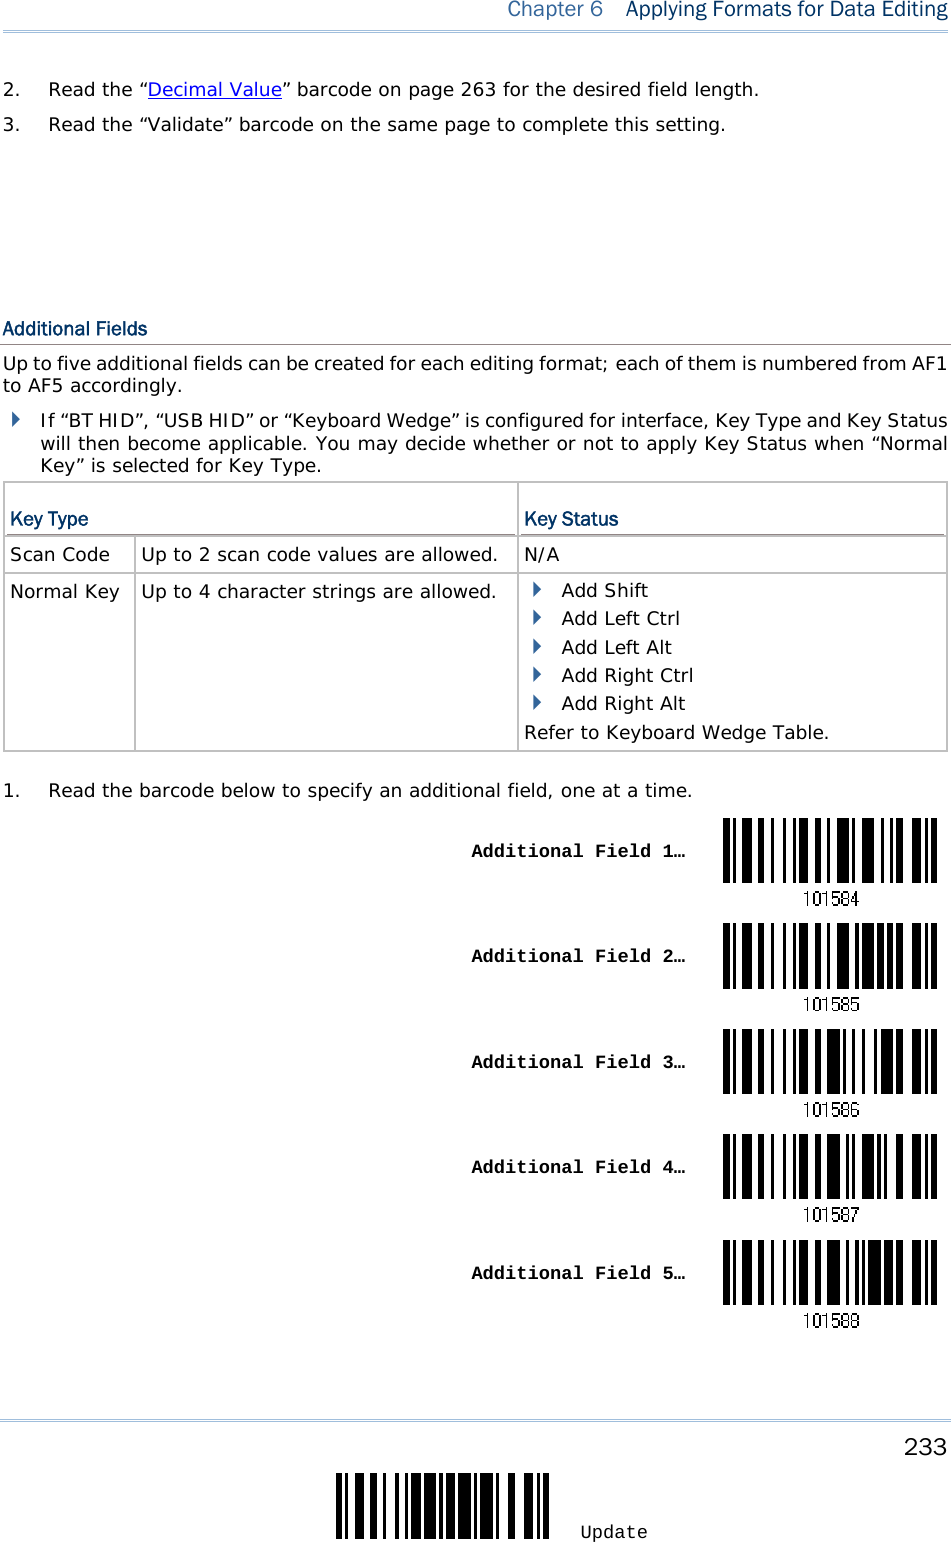     233 Update  Chapter 6  Applying Formats for Data Editing 2.  Read the “Decimal Value” barcode on page 263 for the desired field length. 3.  Read the “Validate” barcode on the same page to complete this setting.         Additional Fields Up to five additional fields can be created for each editing format; each of them is numbered from AF1 to AF5 accordingly.  If “BT HID”, “USB HID” or “Keyboard Wedge” is configured for interface, Key Type and Key Status will then become applicable. You may decide whether or not to apply Key Status when “Normal Key” is selected for Key Type.  Key Type  Key Status Scan Code   Up to 2 scan code values are allowed. N/A Normal Key   Up to 4 character strings are allowed.   Add Shift  Add Left Ctrl  Add Left Alt  Add Right Ctrl  Add Right Alt Refer to Keyboard Wedge Table.   1.  Read the barcode below to specify an additional field, one at a time.  Additional Field 1… Additional Field 2… Additional Field 3… Additional Field 4… Additional Field 5…